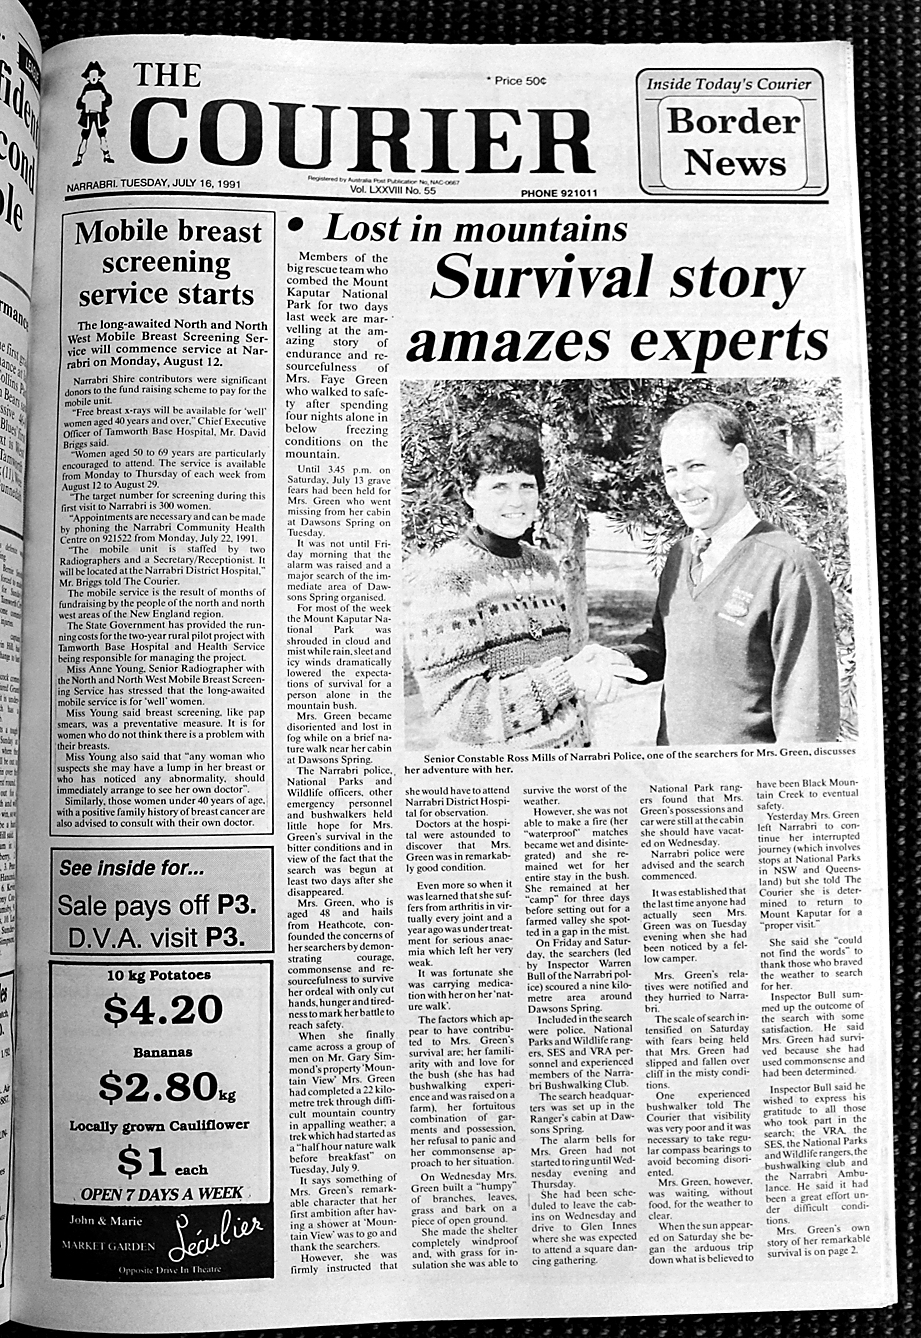 The original article on the front page of the Narrabri Courier on July 16, 1991.